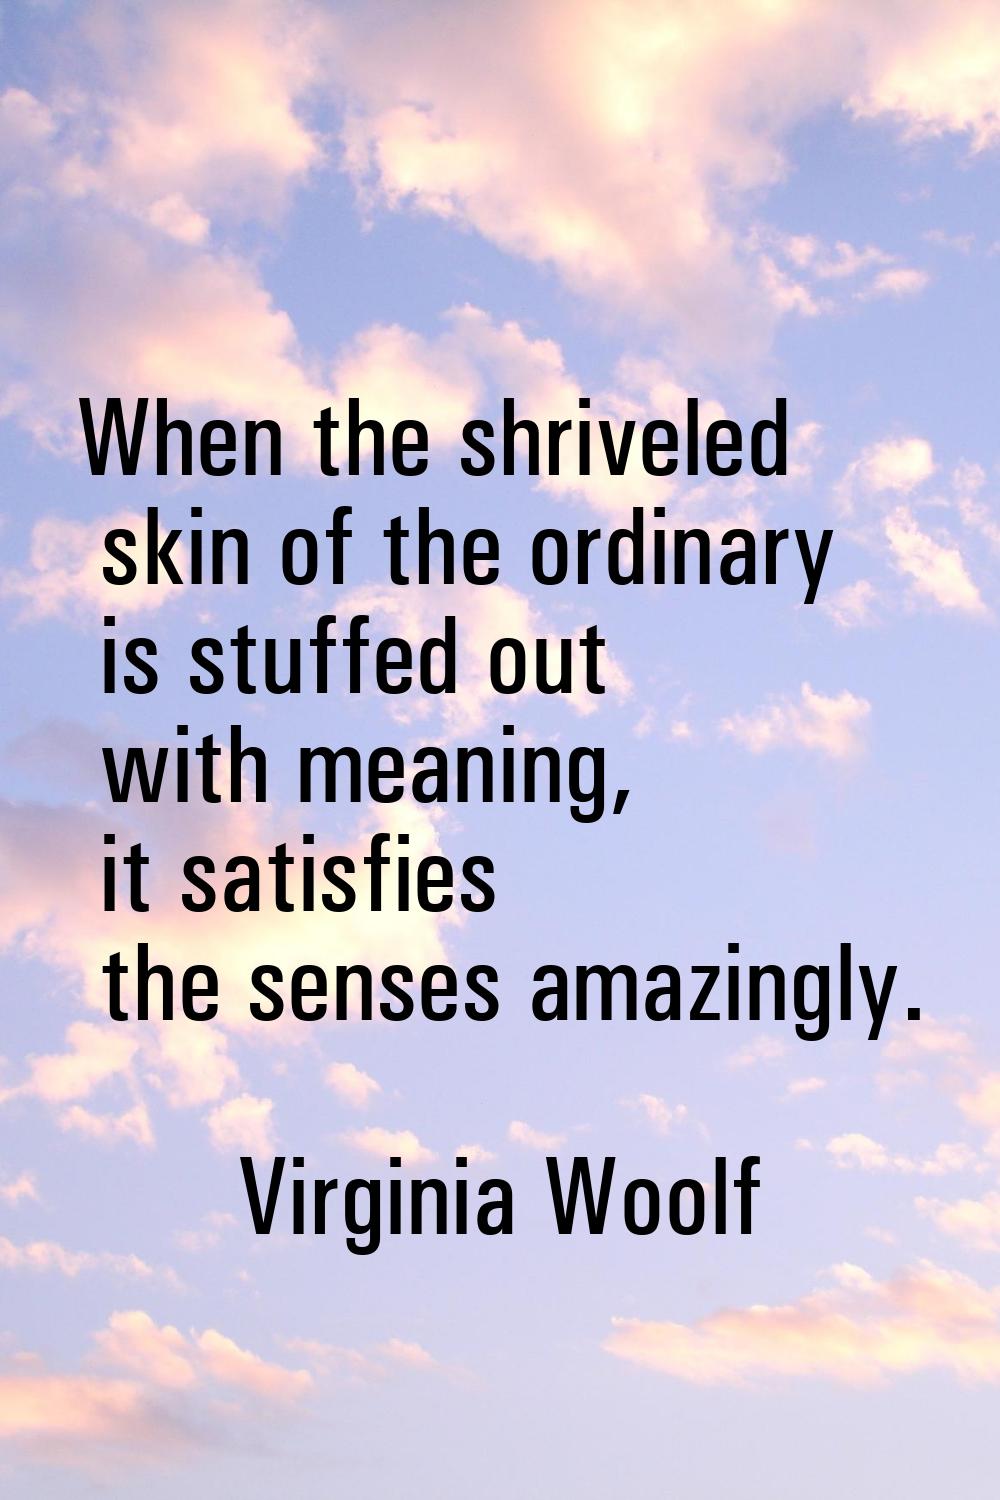 When the shriveled skin of the ordinary is stuffed out with meaning, it satisfies the senses amazin